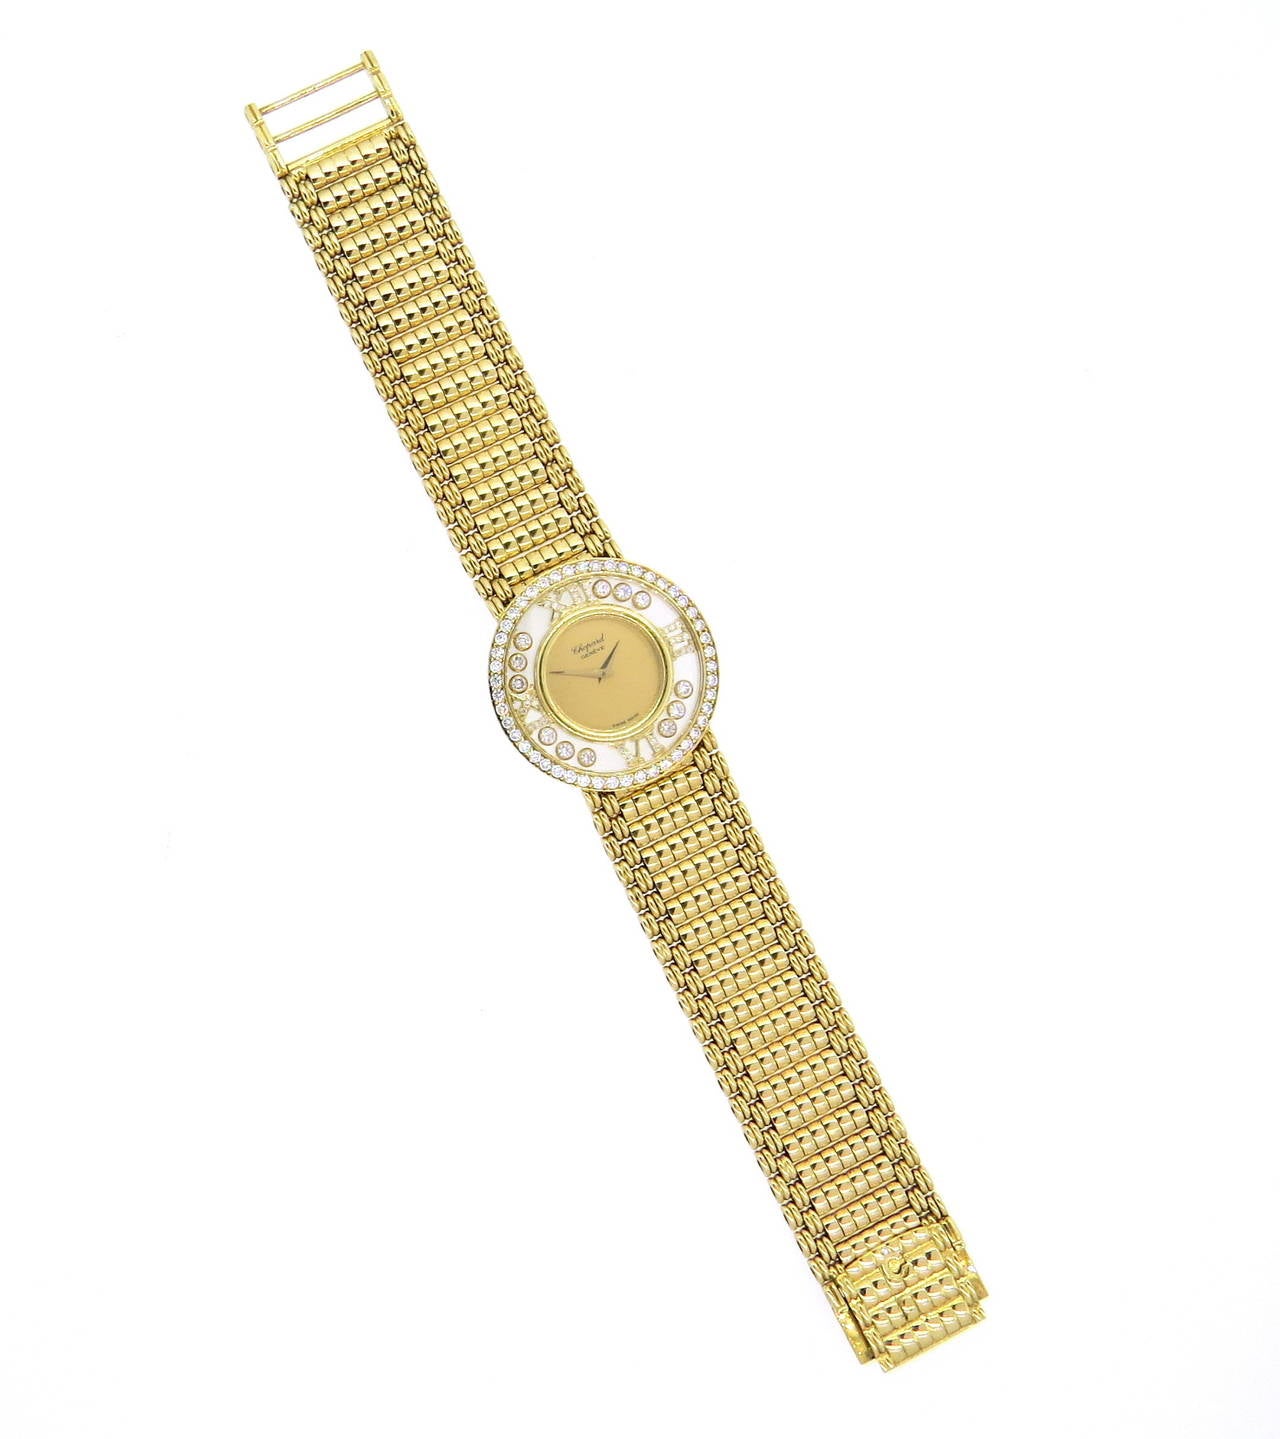 Unisex Impressive 18k yellow gold watch with quartz movement, set with diamond bezel, four diamond Roman numeral markers and twelve floating diamonds on the dial. Case is 32mm in diameter, 18k gold band is 7 1/2